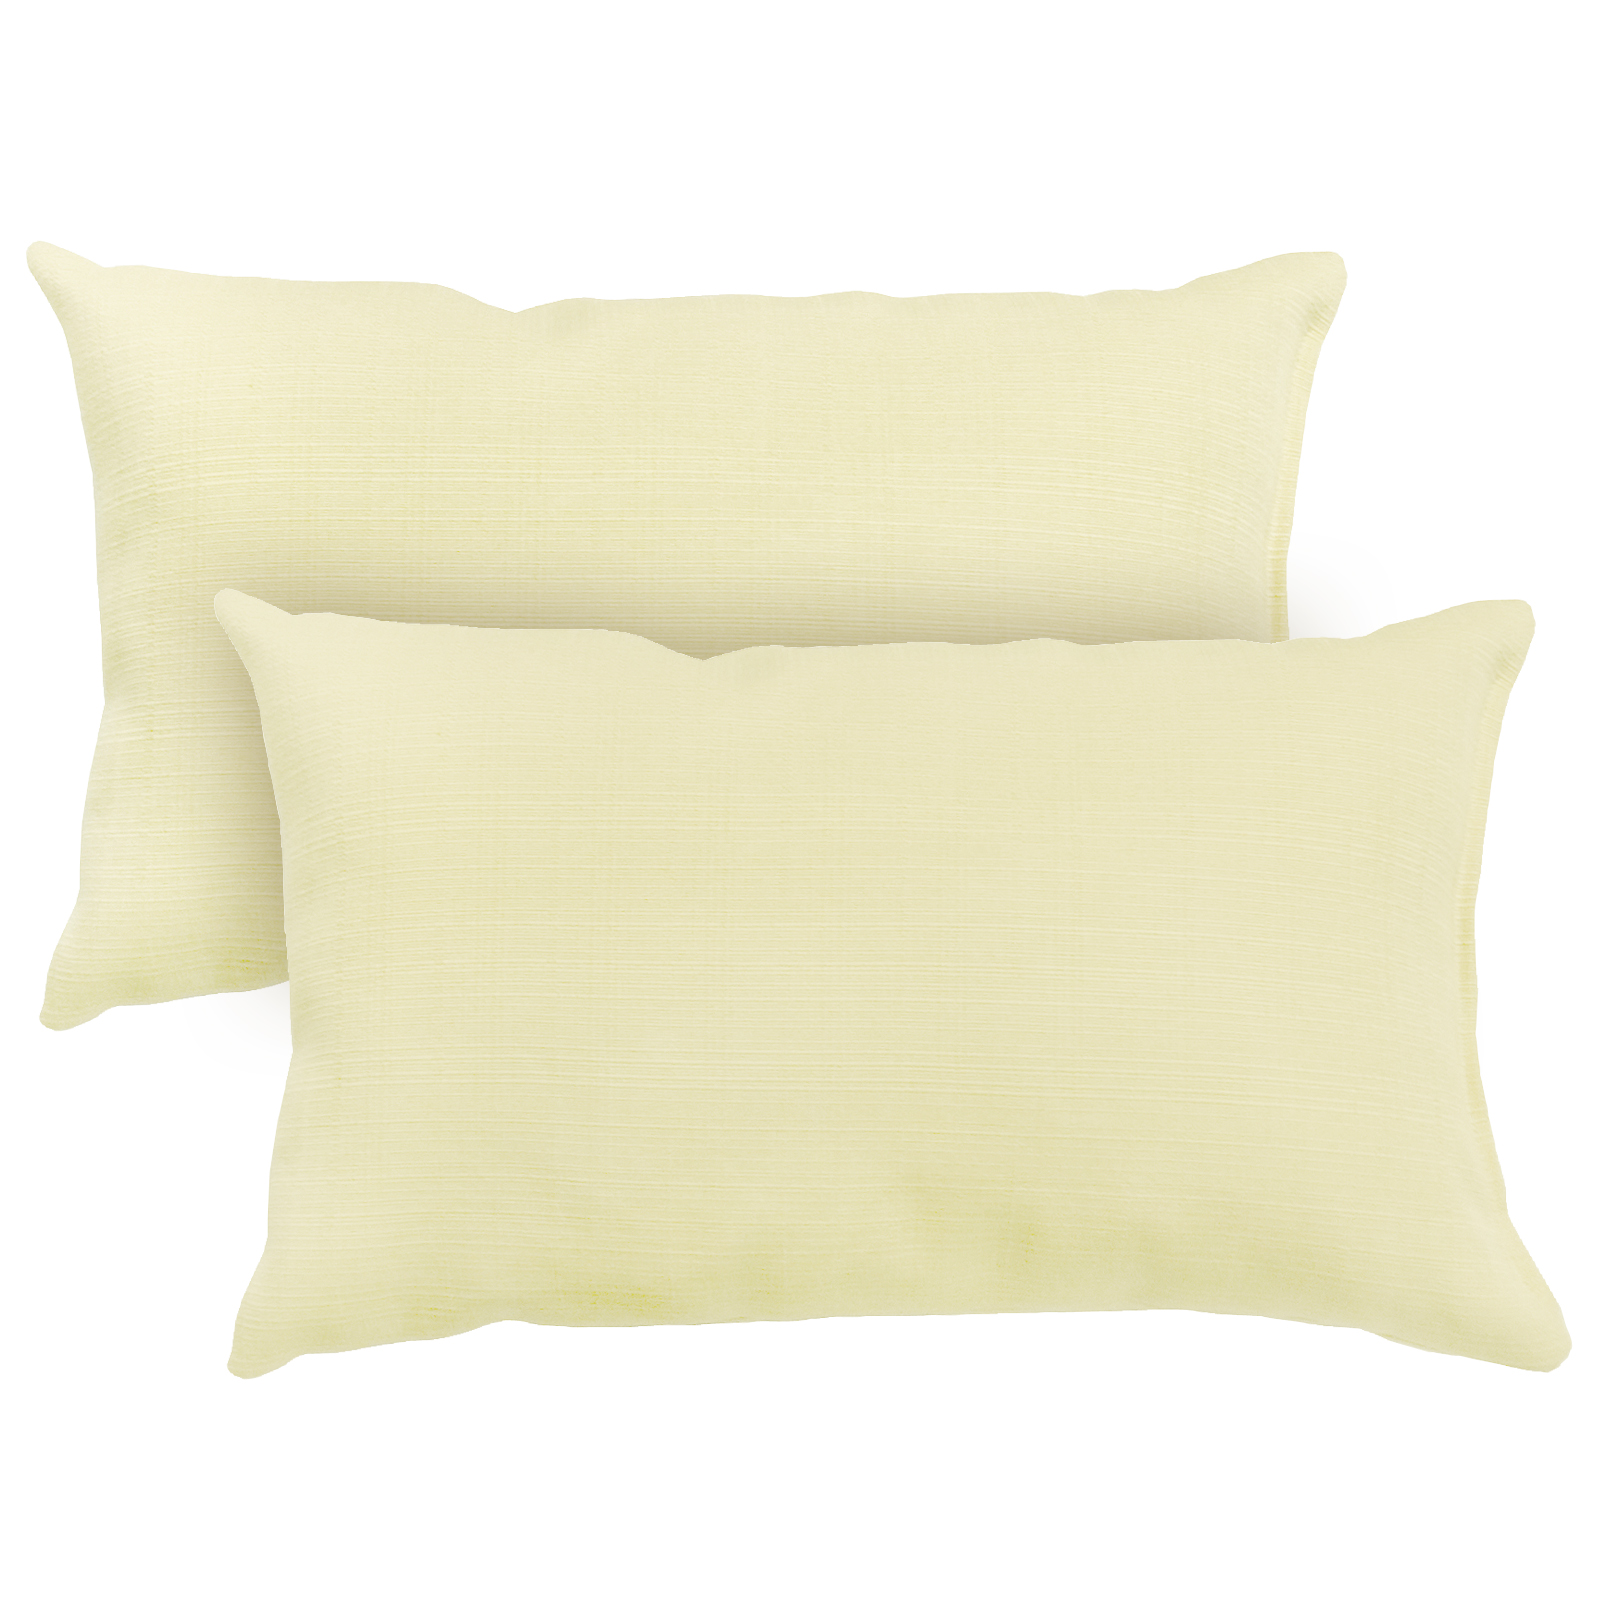 Rectangle Outdoor Accent Pillows, Set of Two, Tan